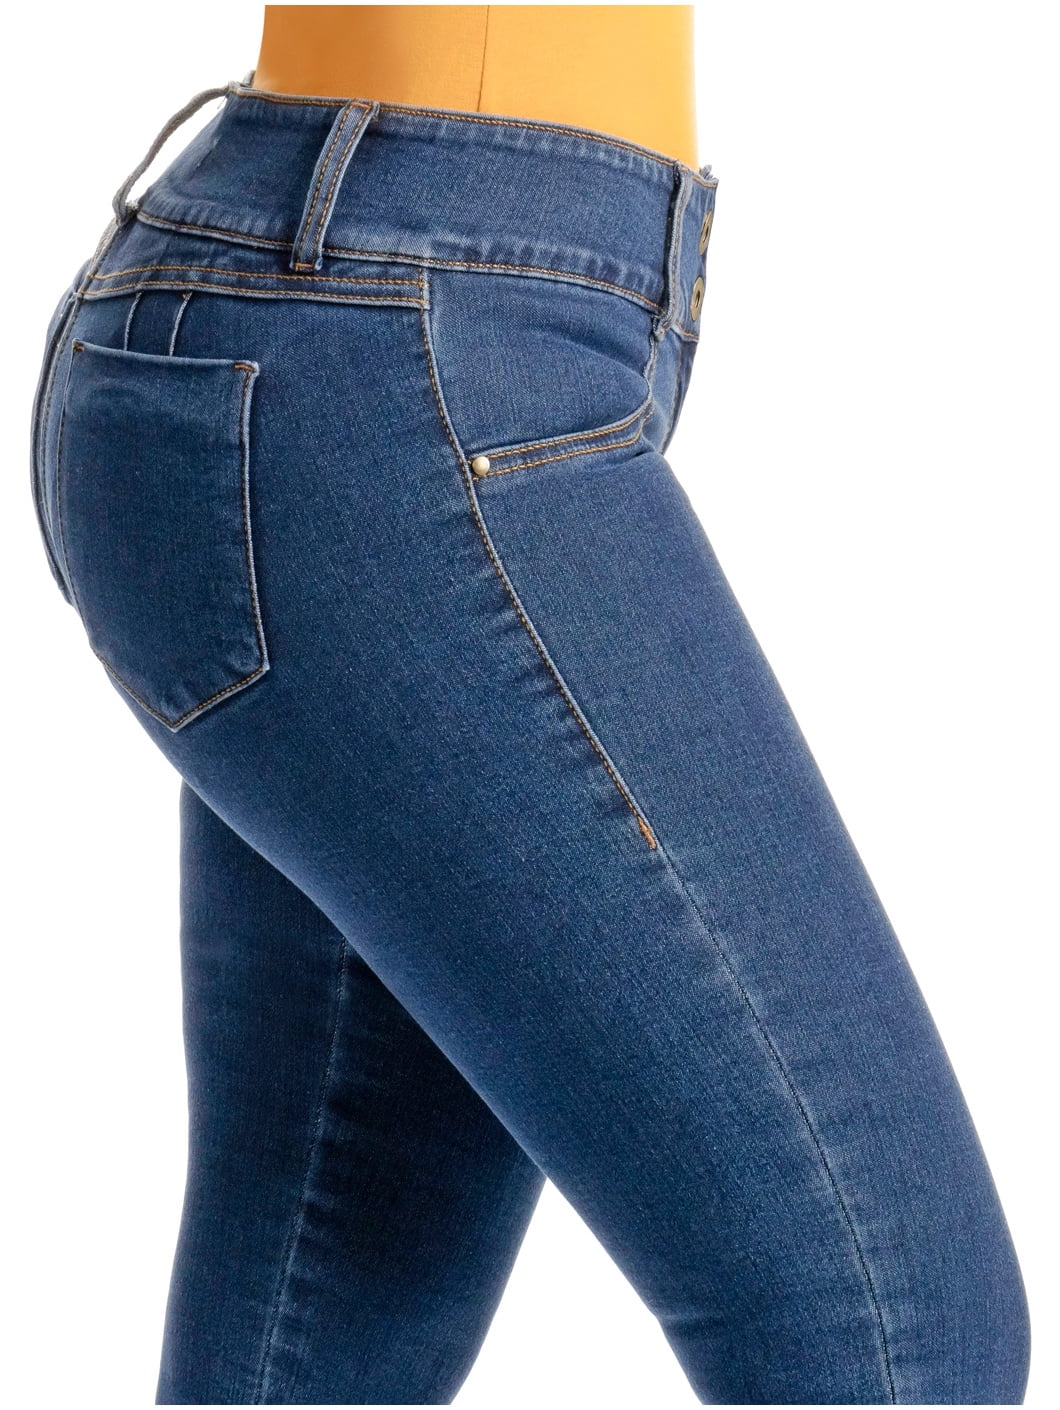 Lowla JE217988 Women High Waisted Butt Lifting Skinny Jeans Colombianos  Levanta Cola with Removable Butt Pads Blue 10 